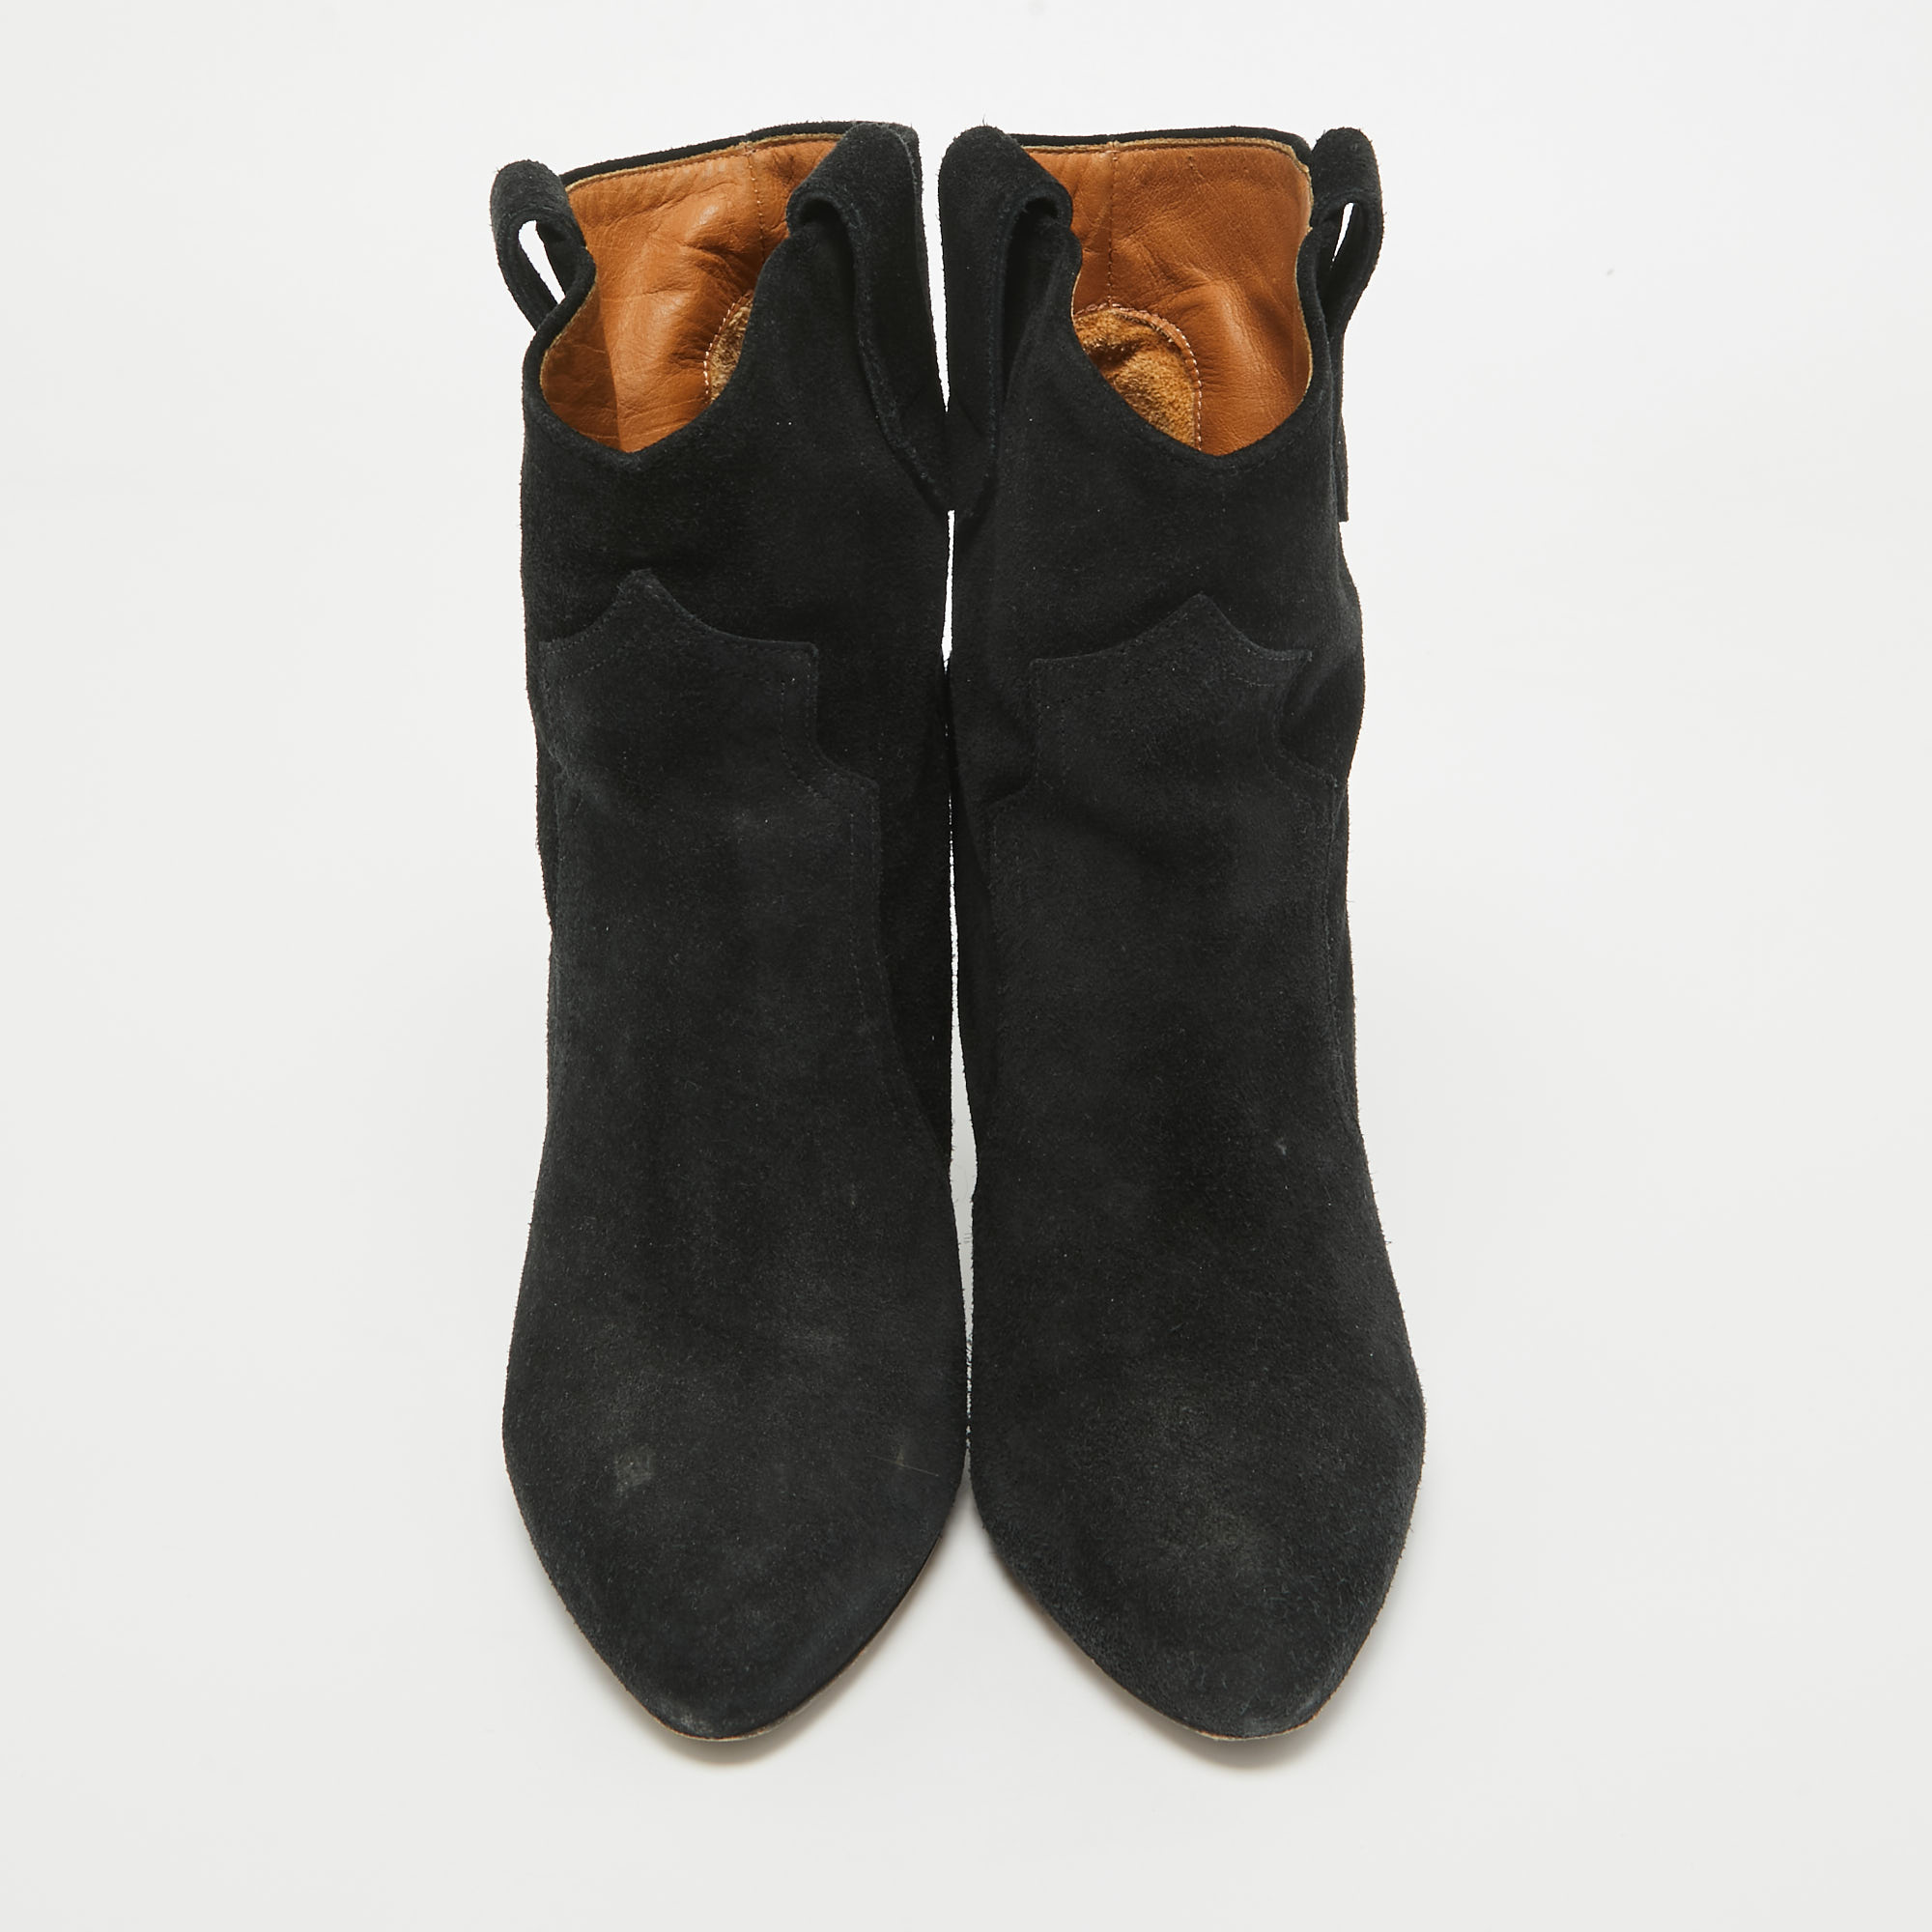 Isabel Marant Black Suede Ankle Boots Size 37